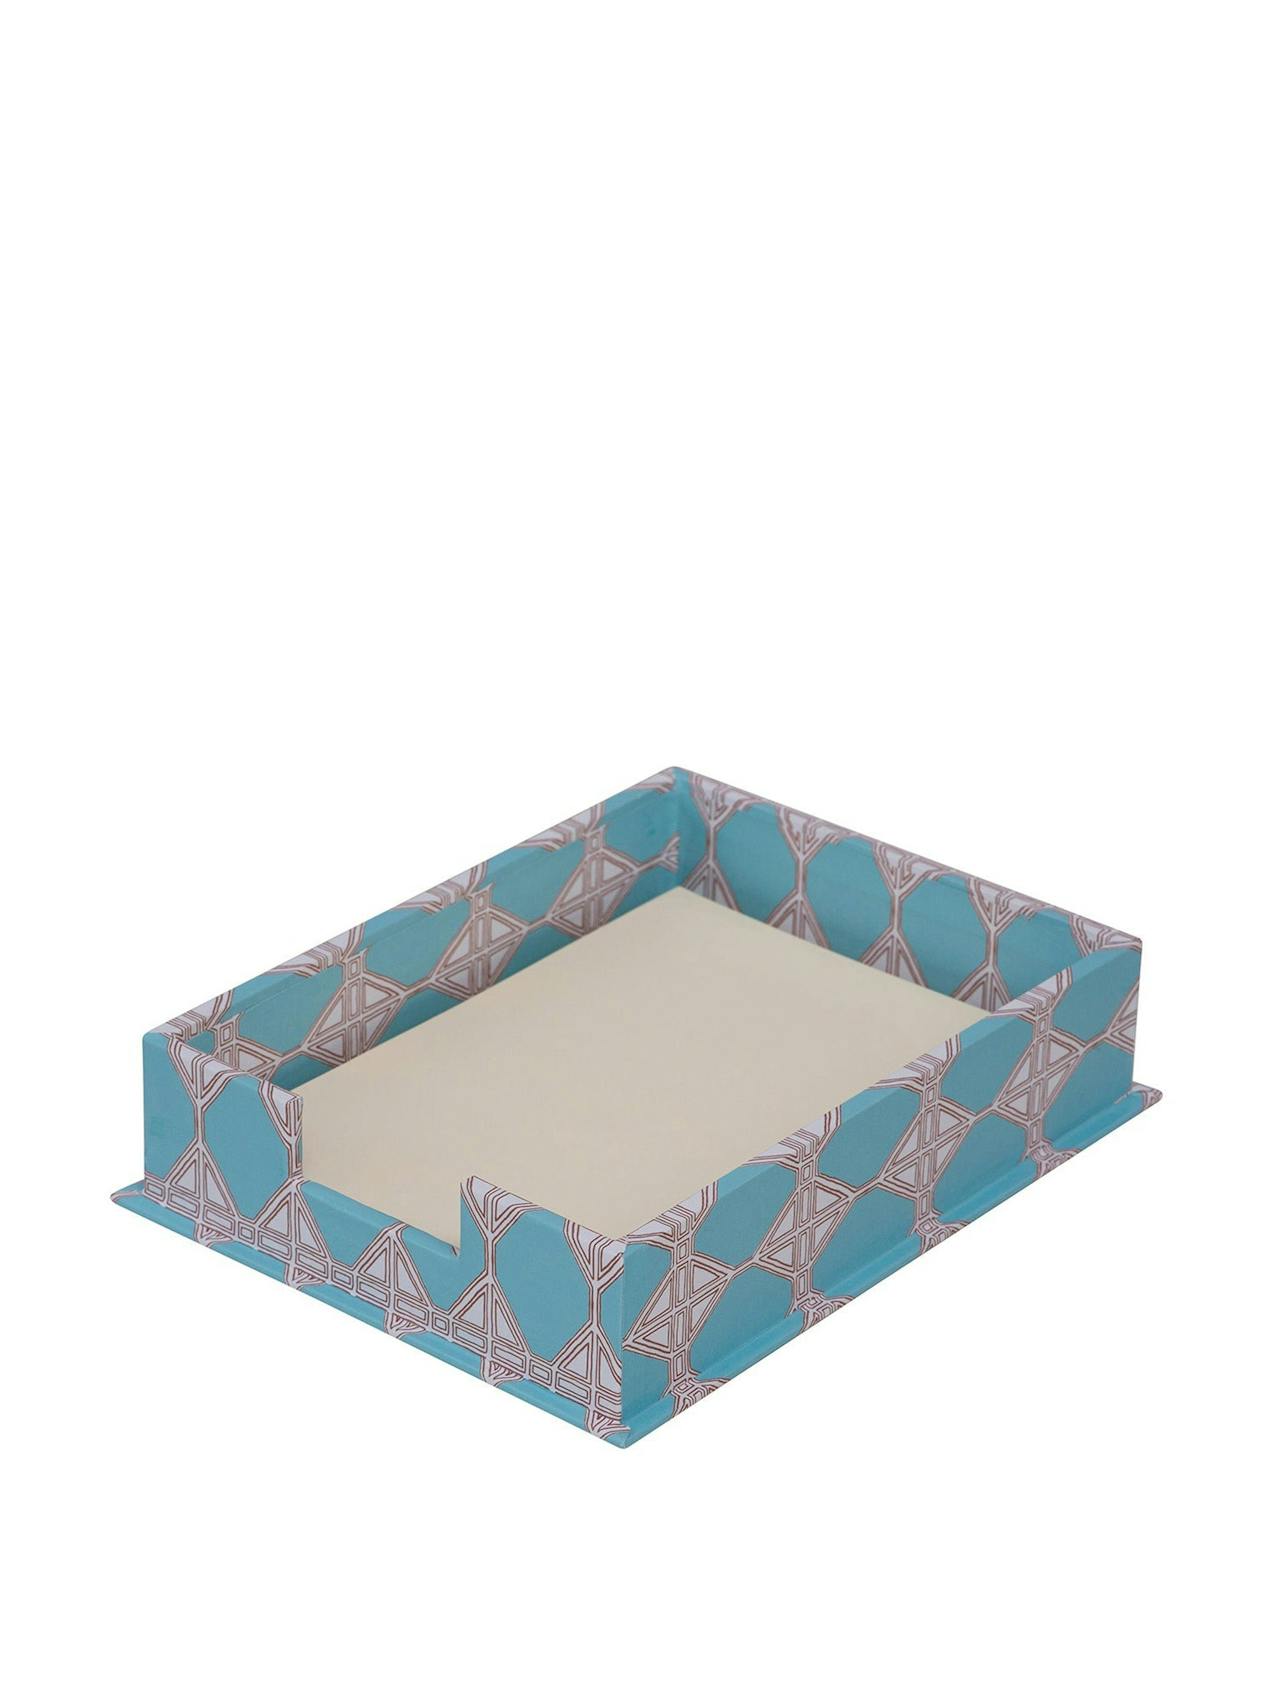 Romarong vai blue letter tray